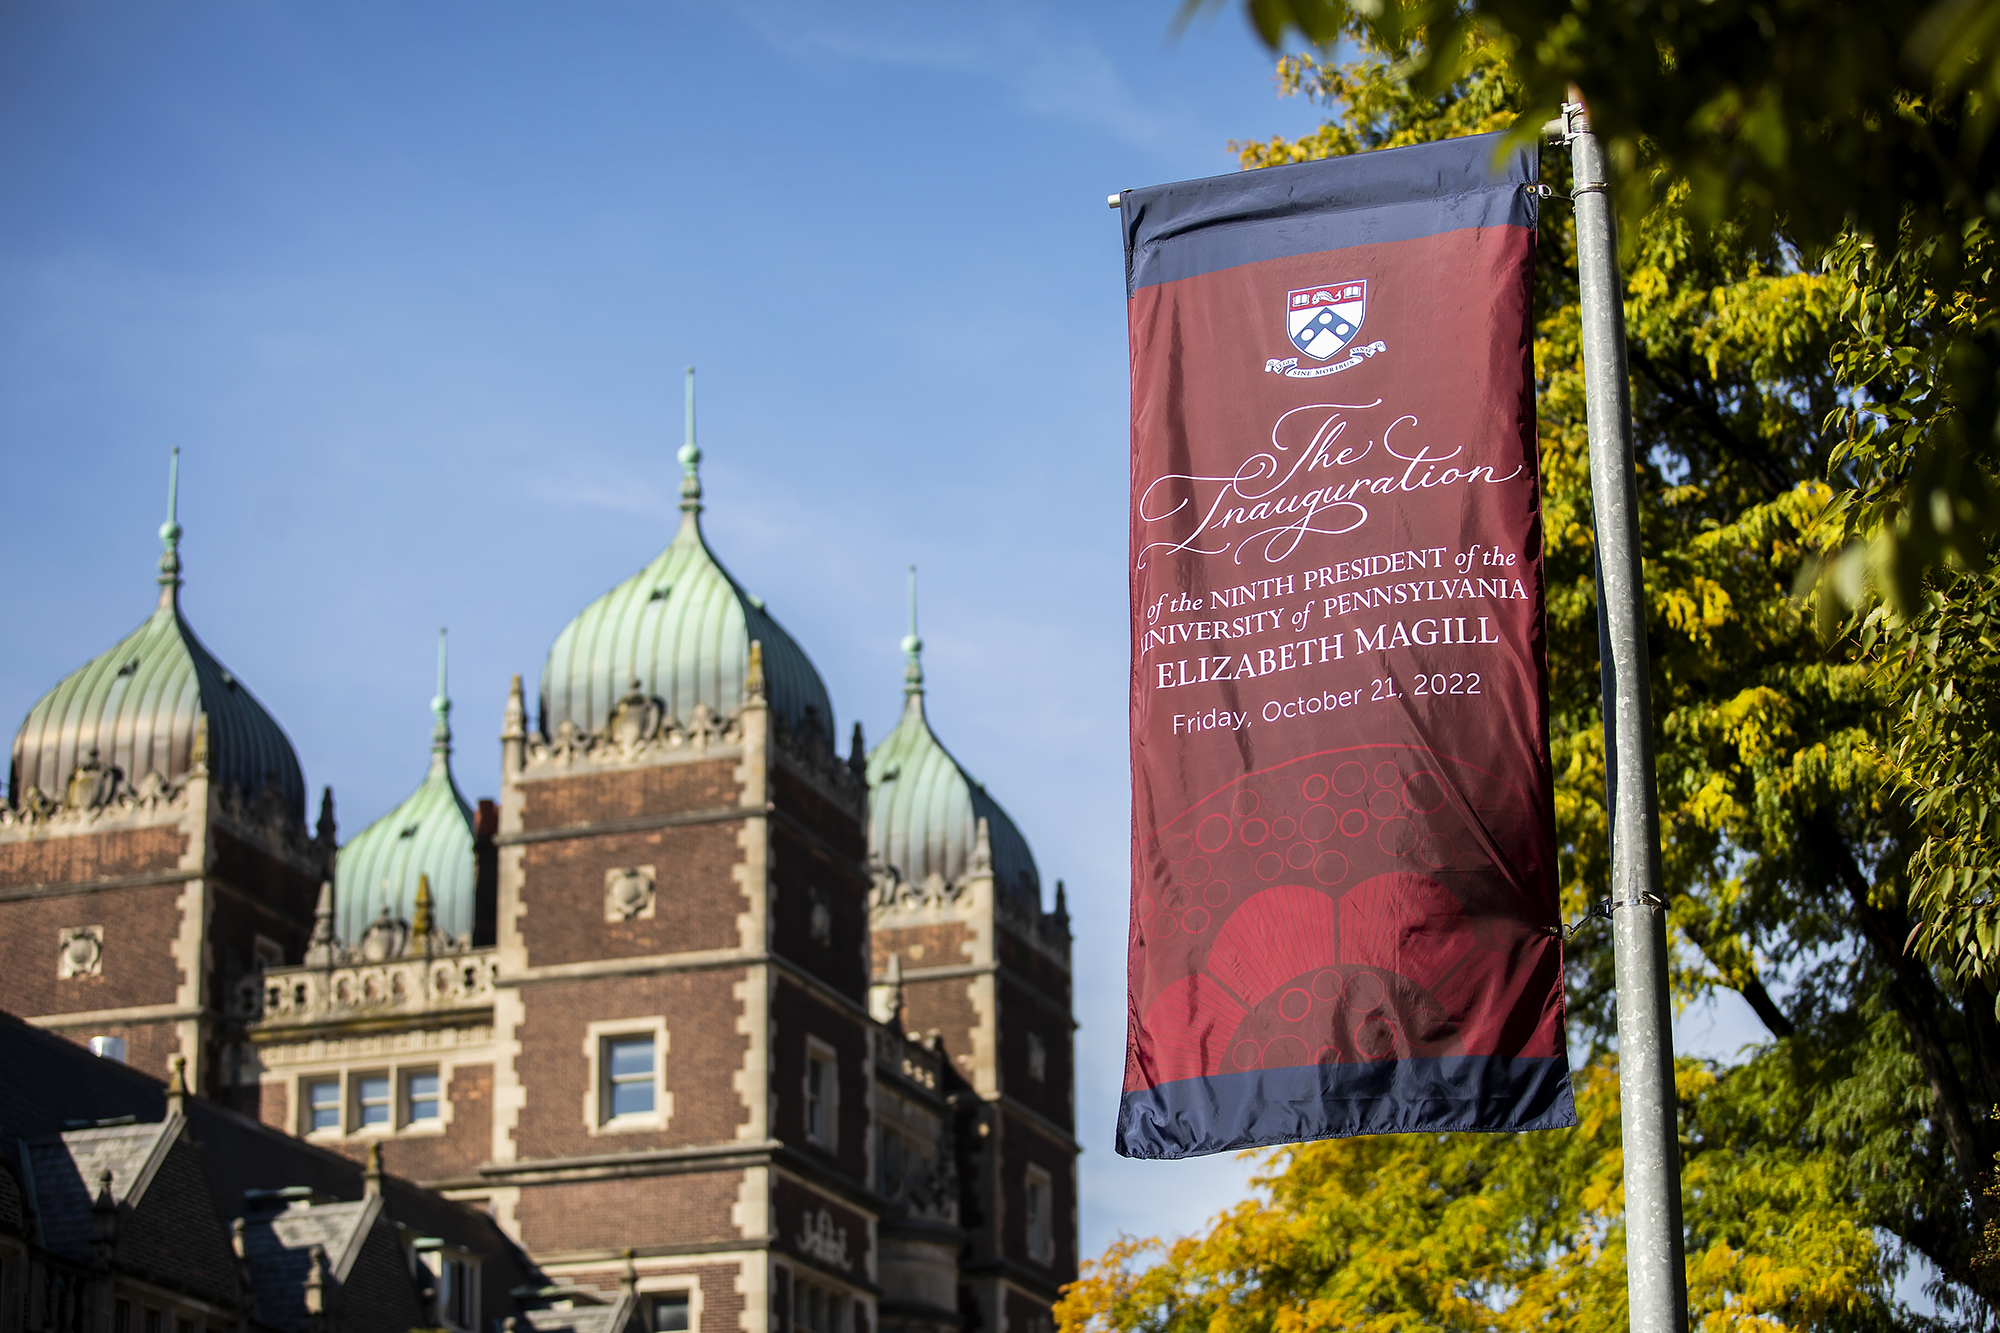 An inauguration banner hanging from a pole on Penn’s campus with the Quad in the background.